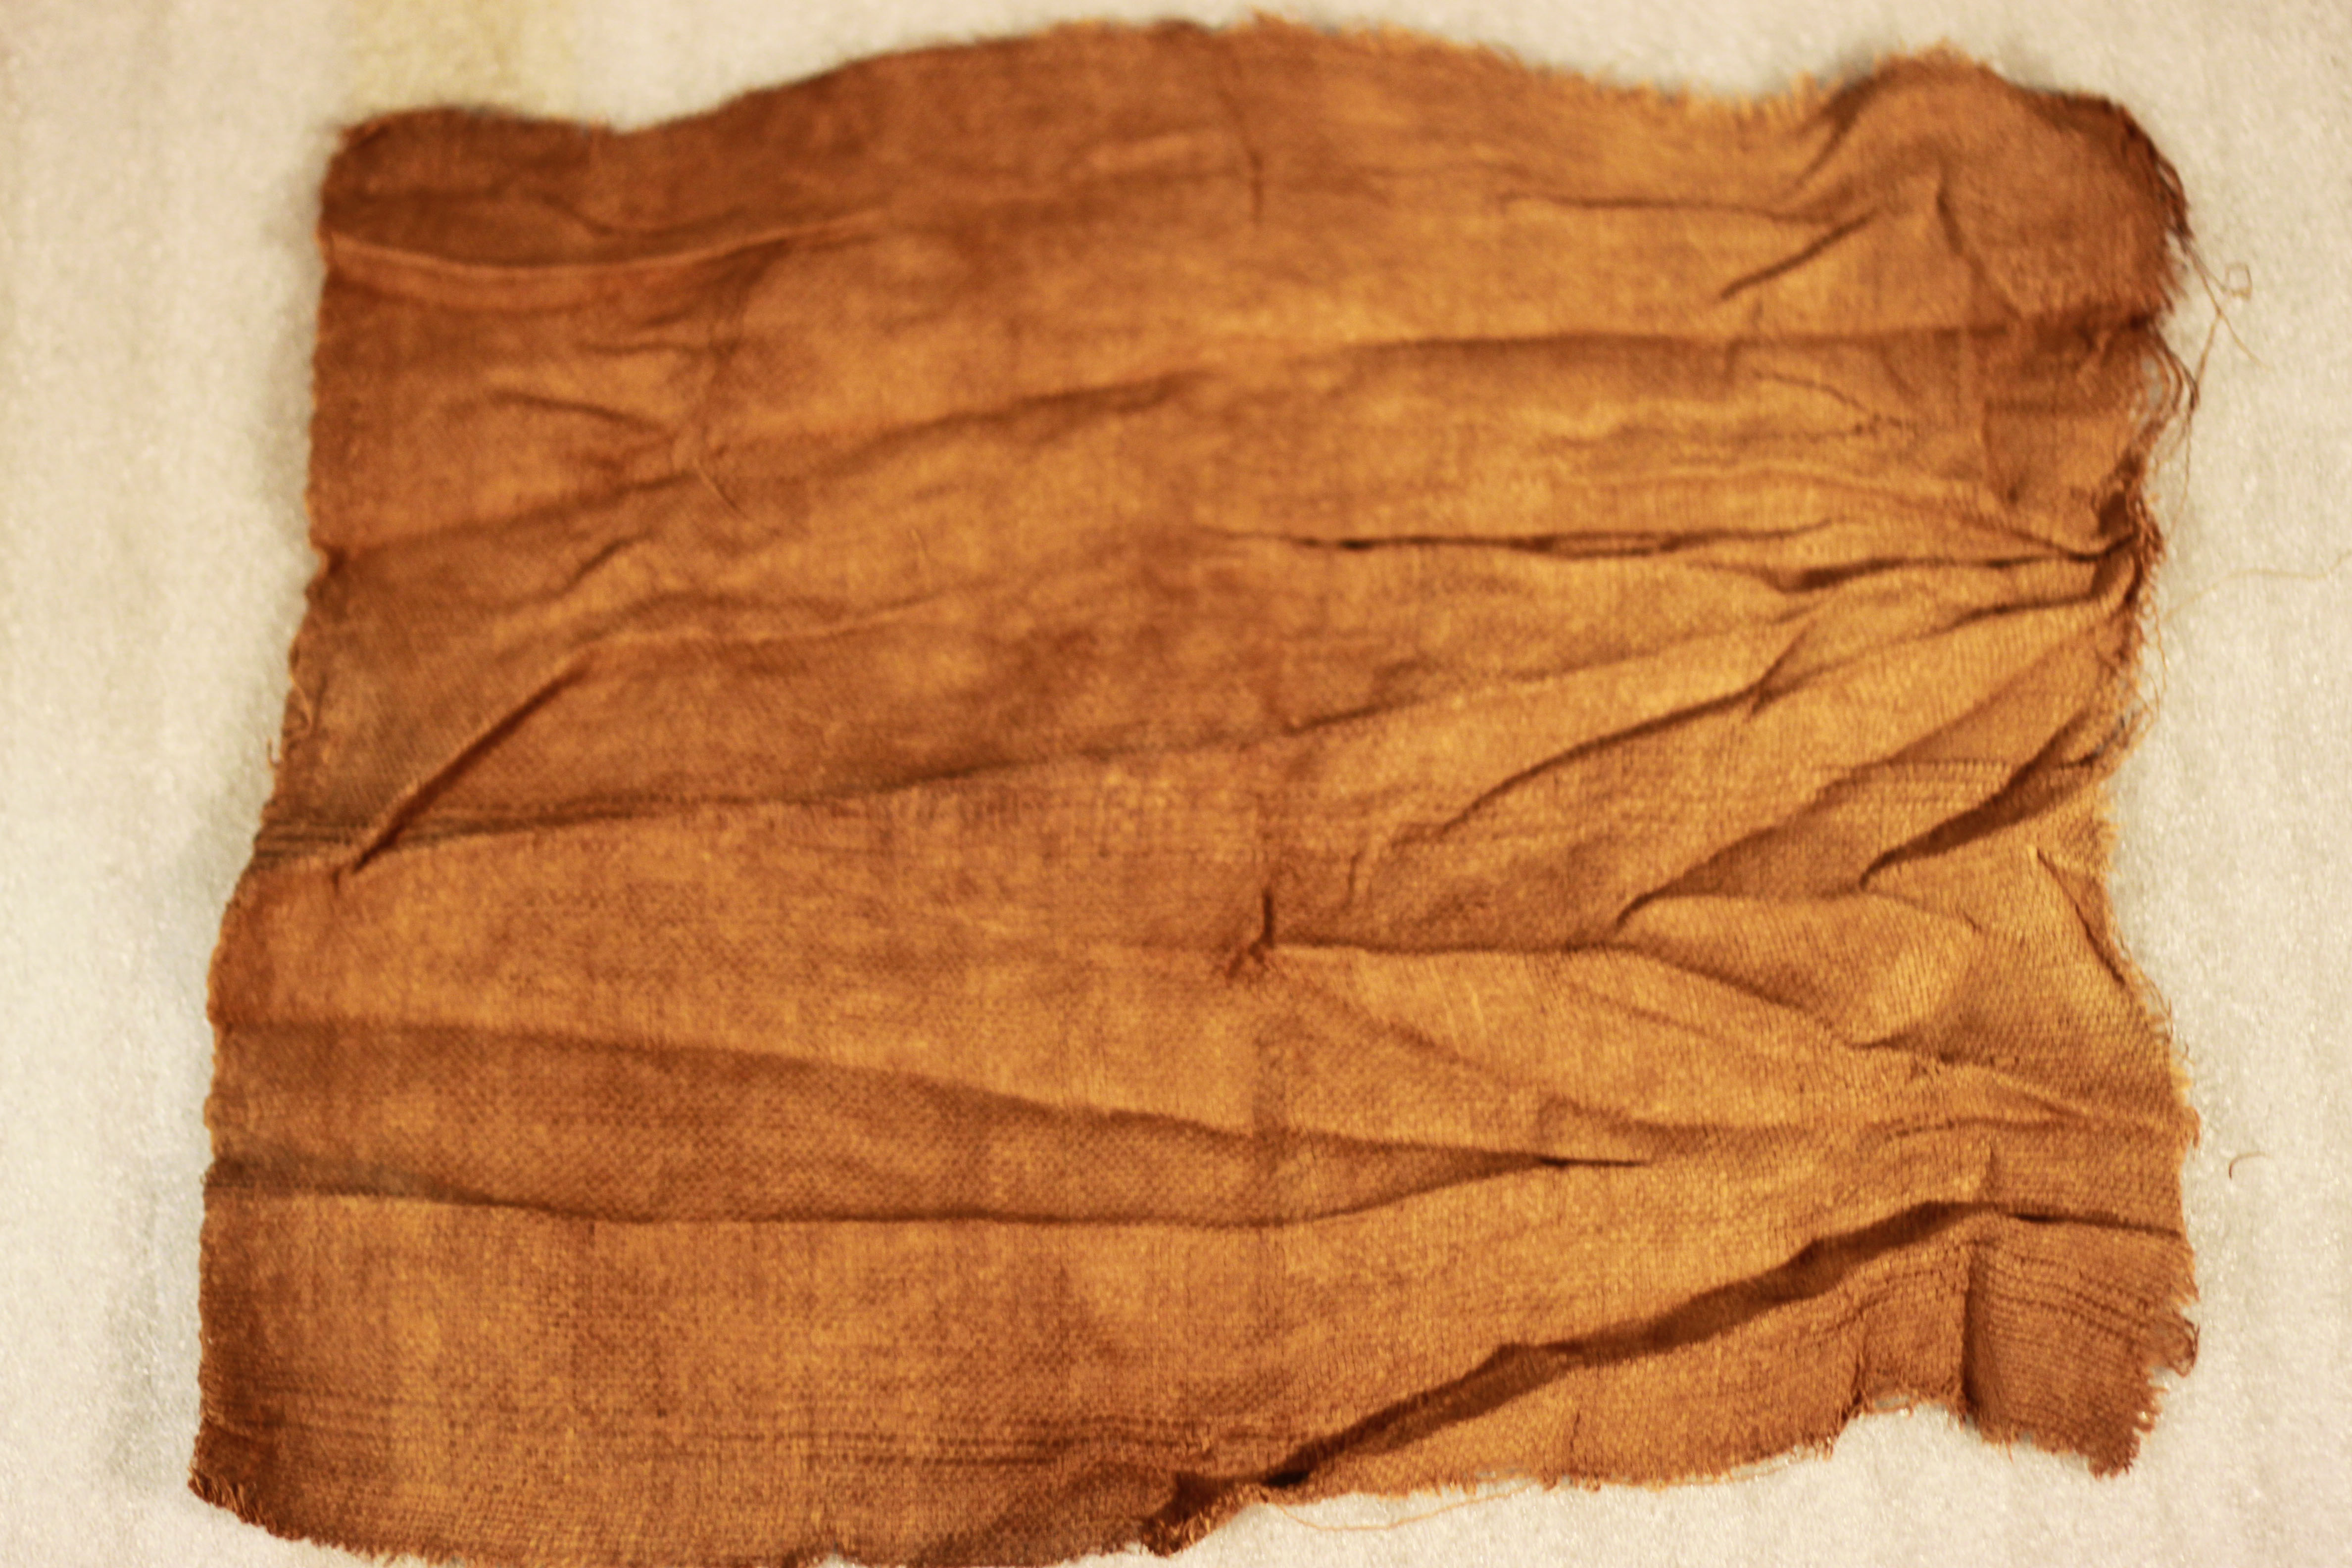 Mummy Linen | McClung Museum of Natural History & Culture